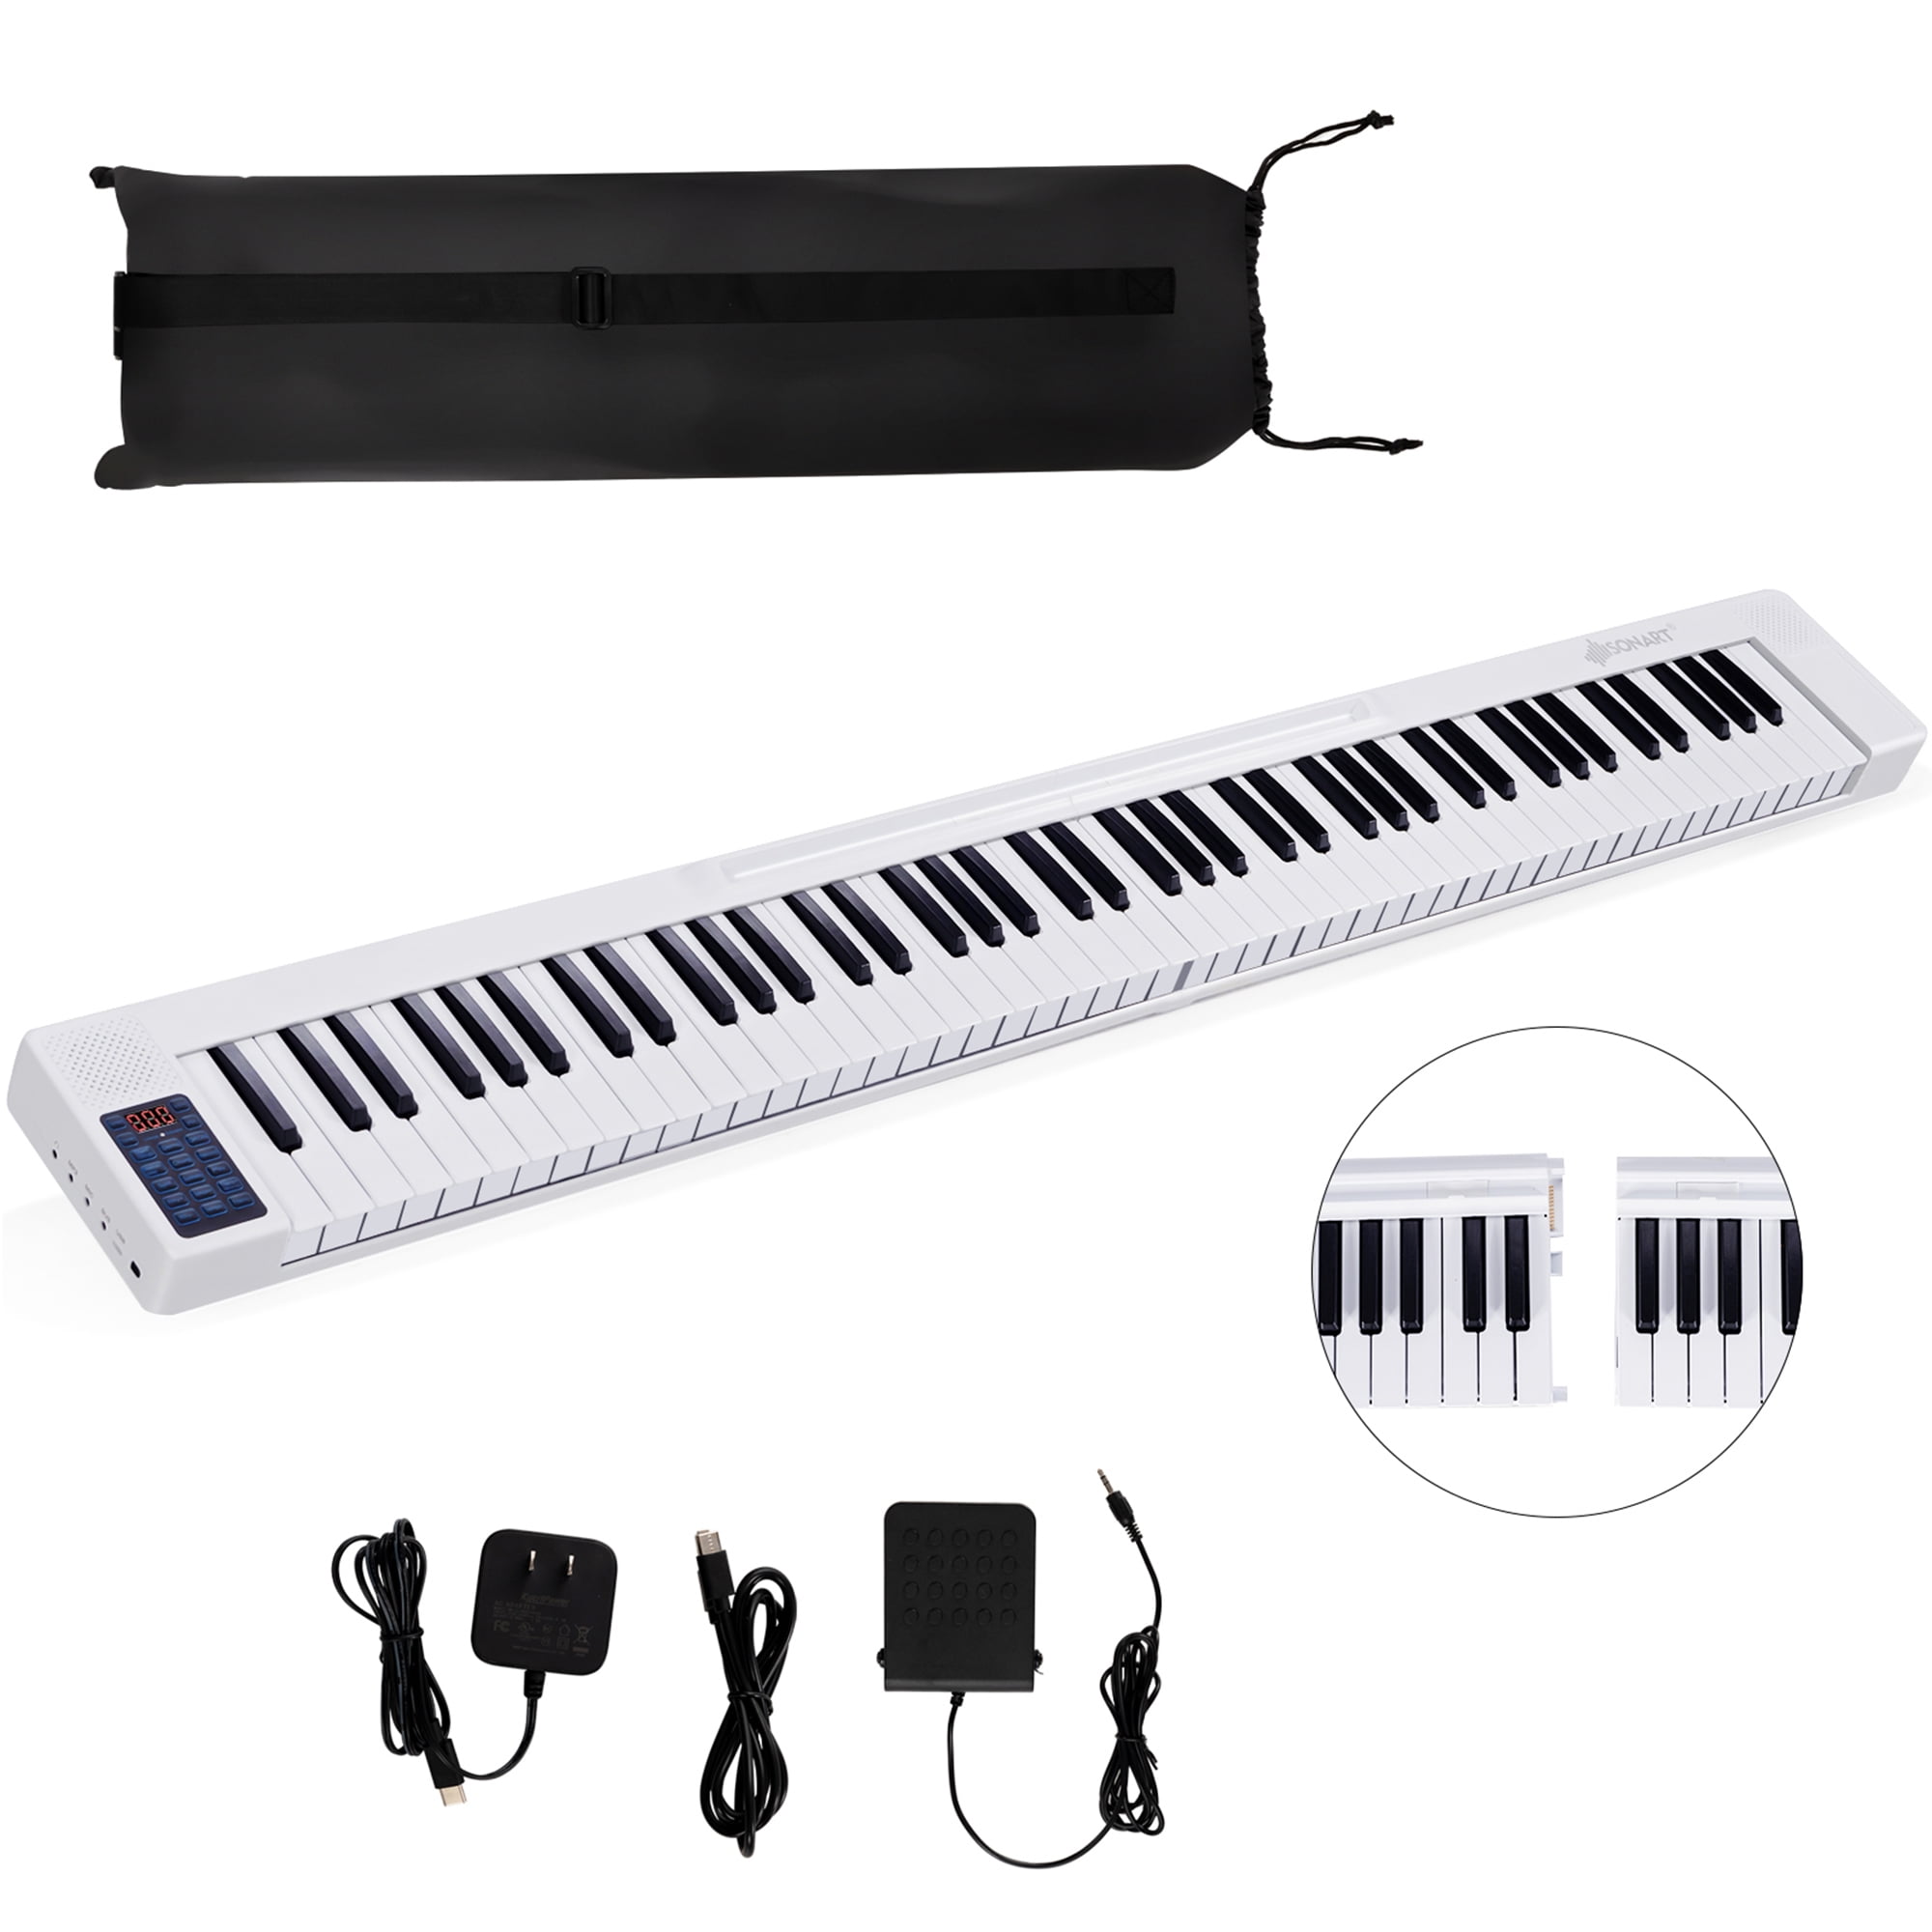 Safeplus Piano Keyboard 88 Keys Touch Sensitive Portable Keyboard with Power Supply 